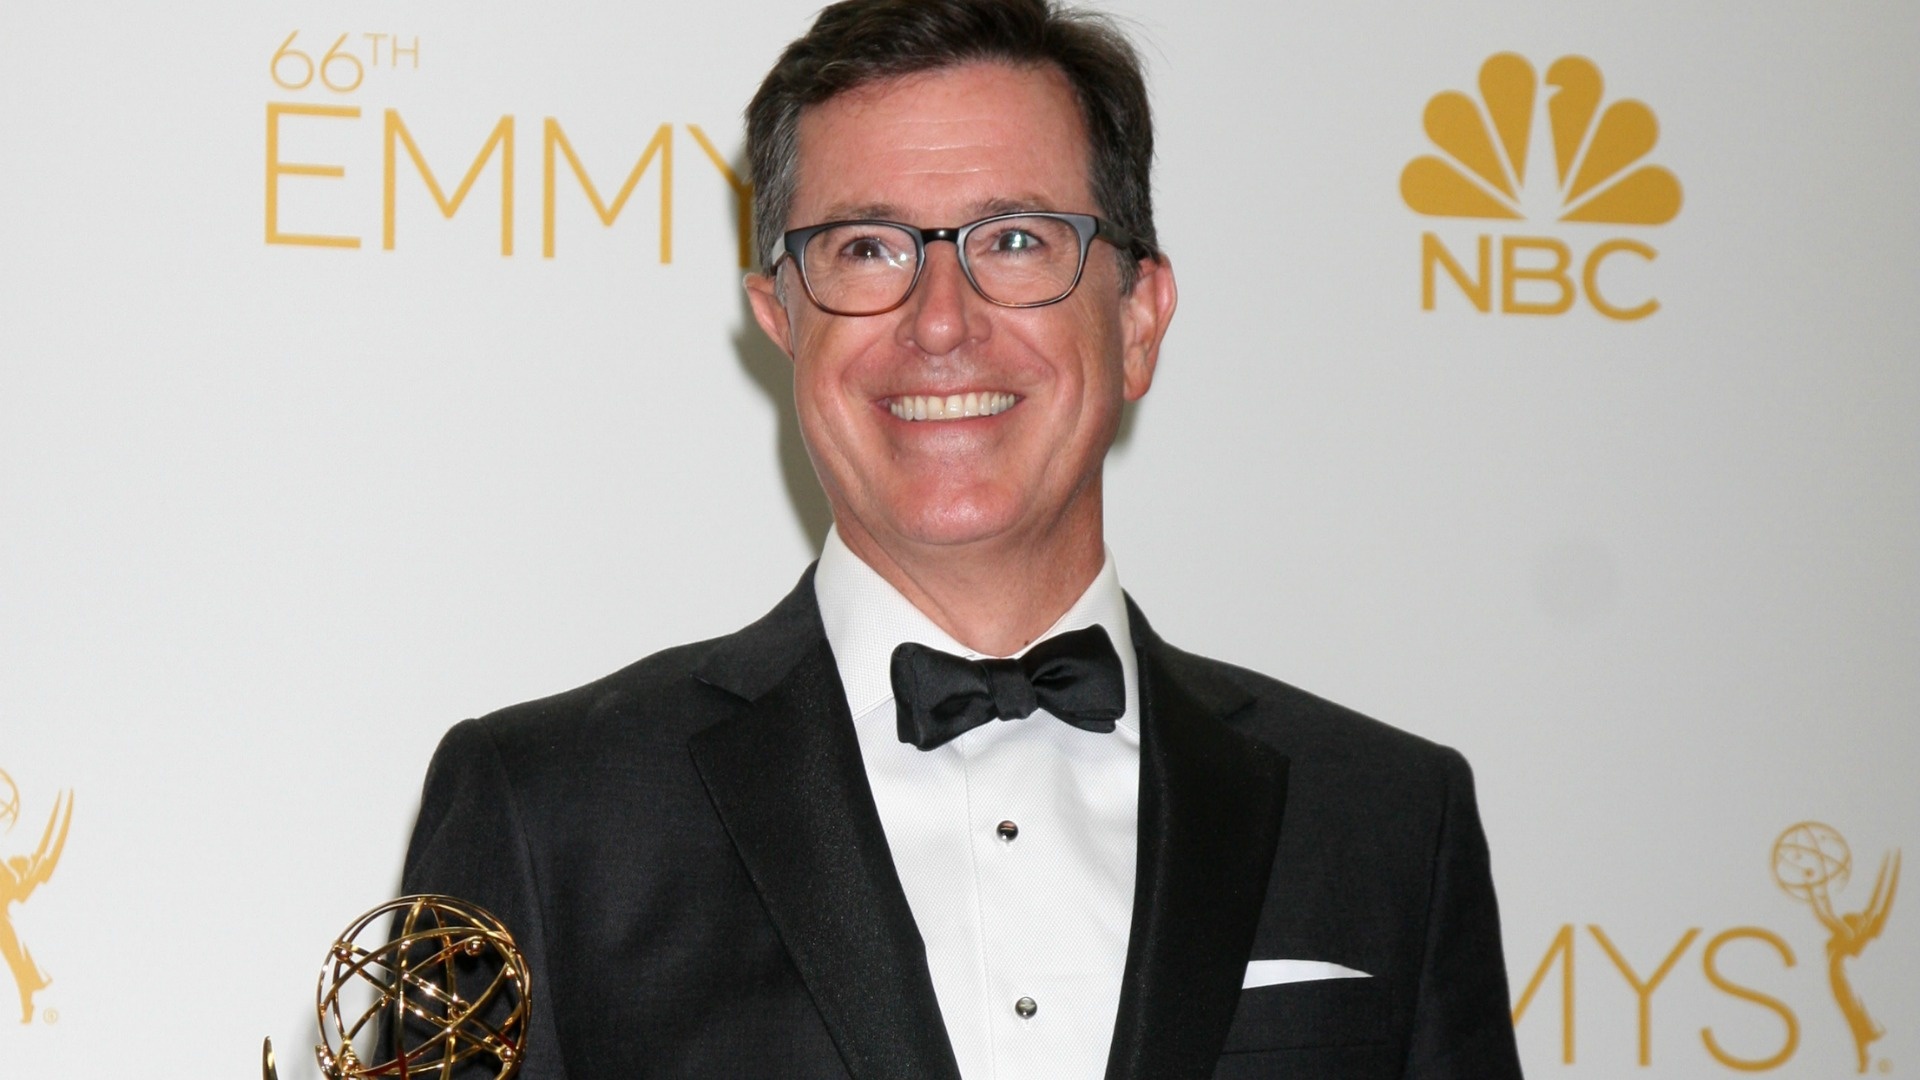 Stephen Colbert wallpapers images, Photoshoot pictures, Celebrity backgrounds, Entertainer's charisma, 1920x1080 Full HD Desktop